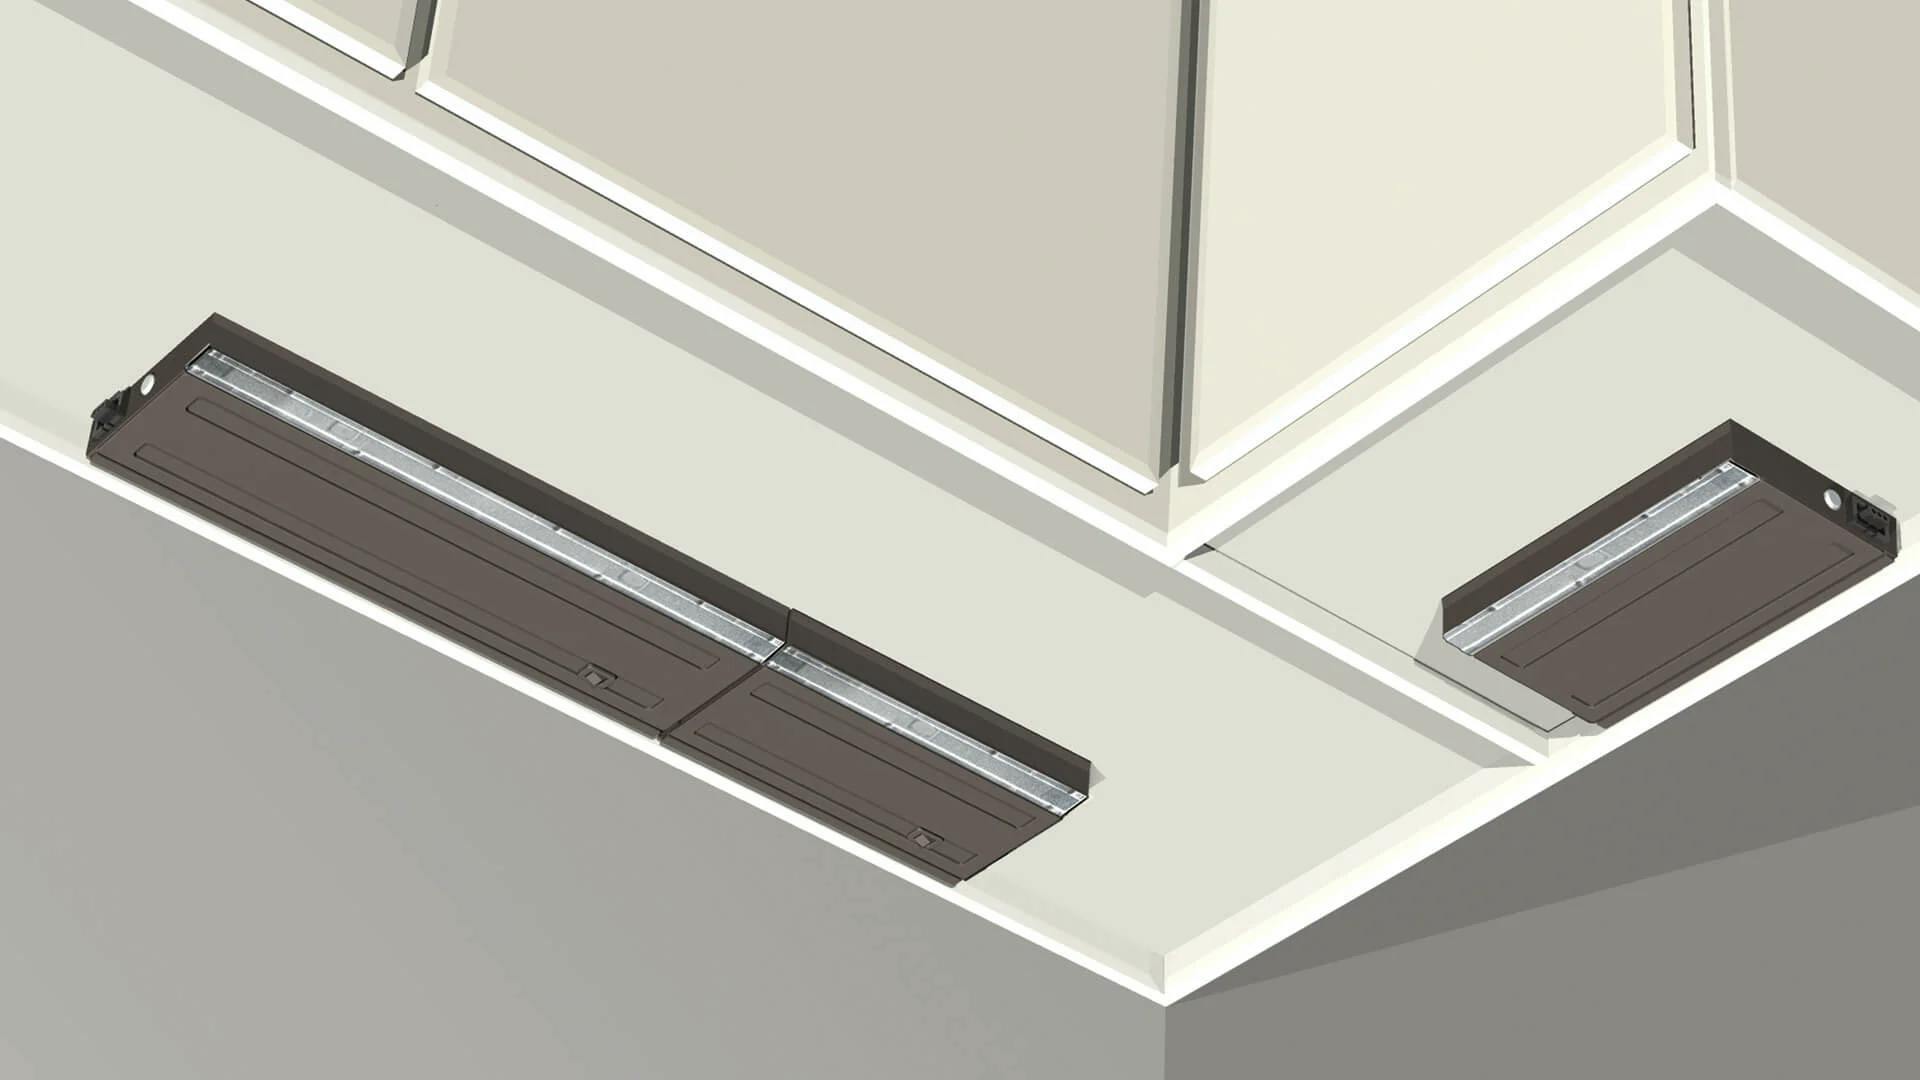 Illustration of under cabinet light boxes attached to cabinet.